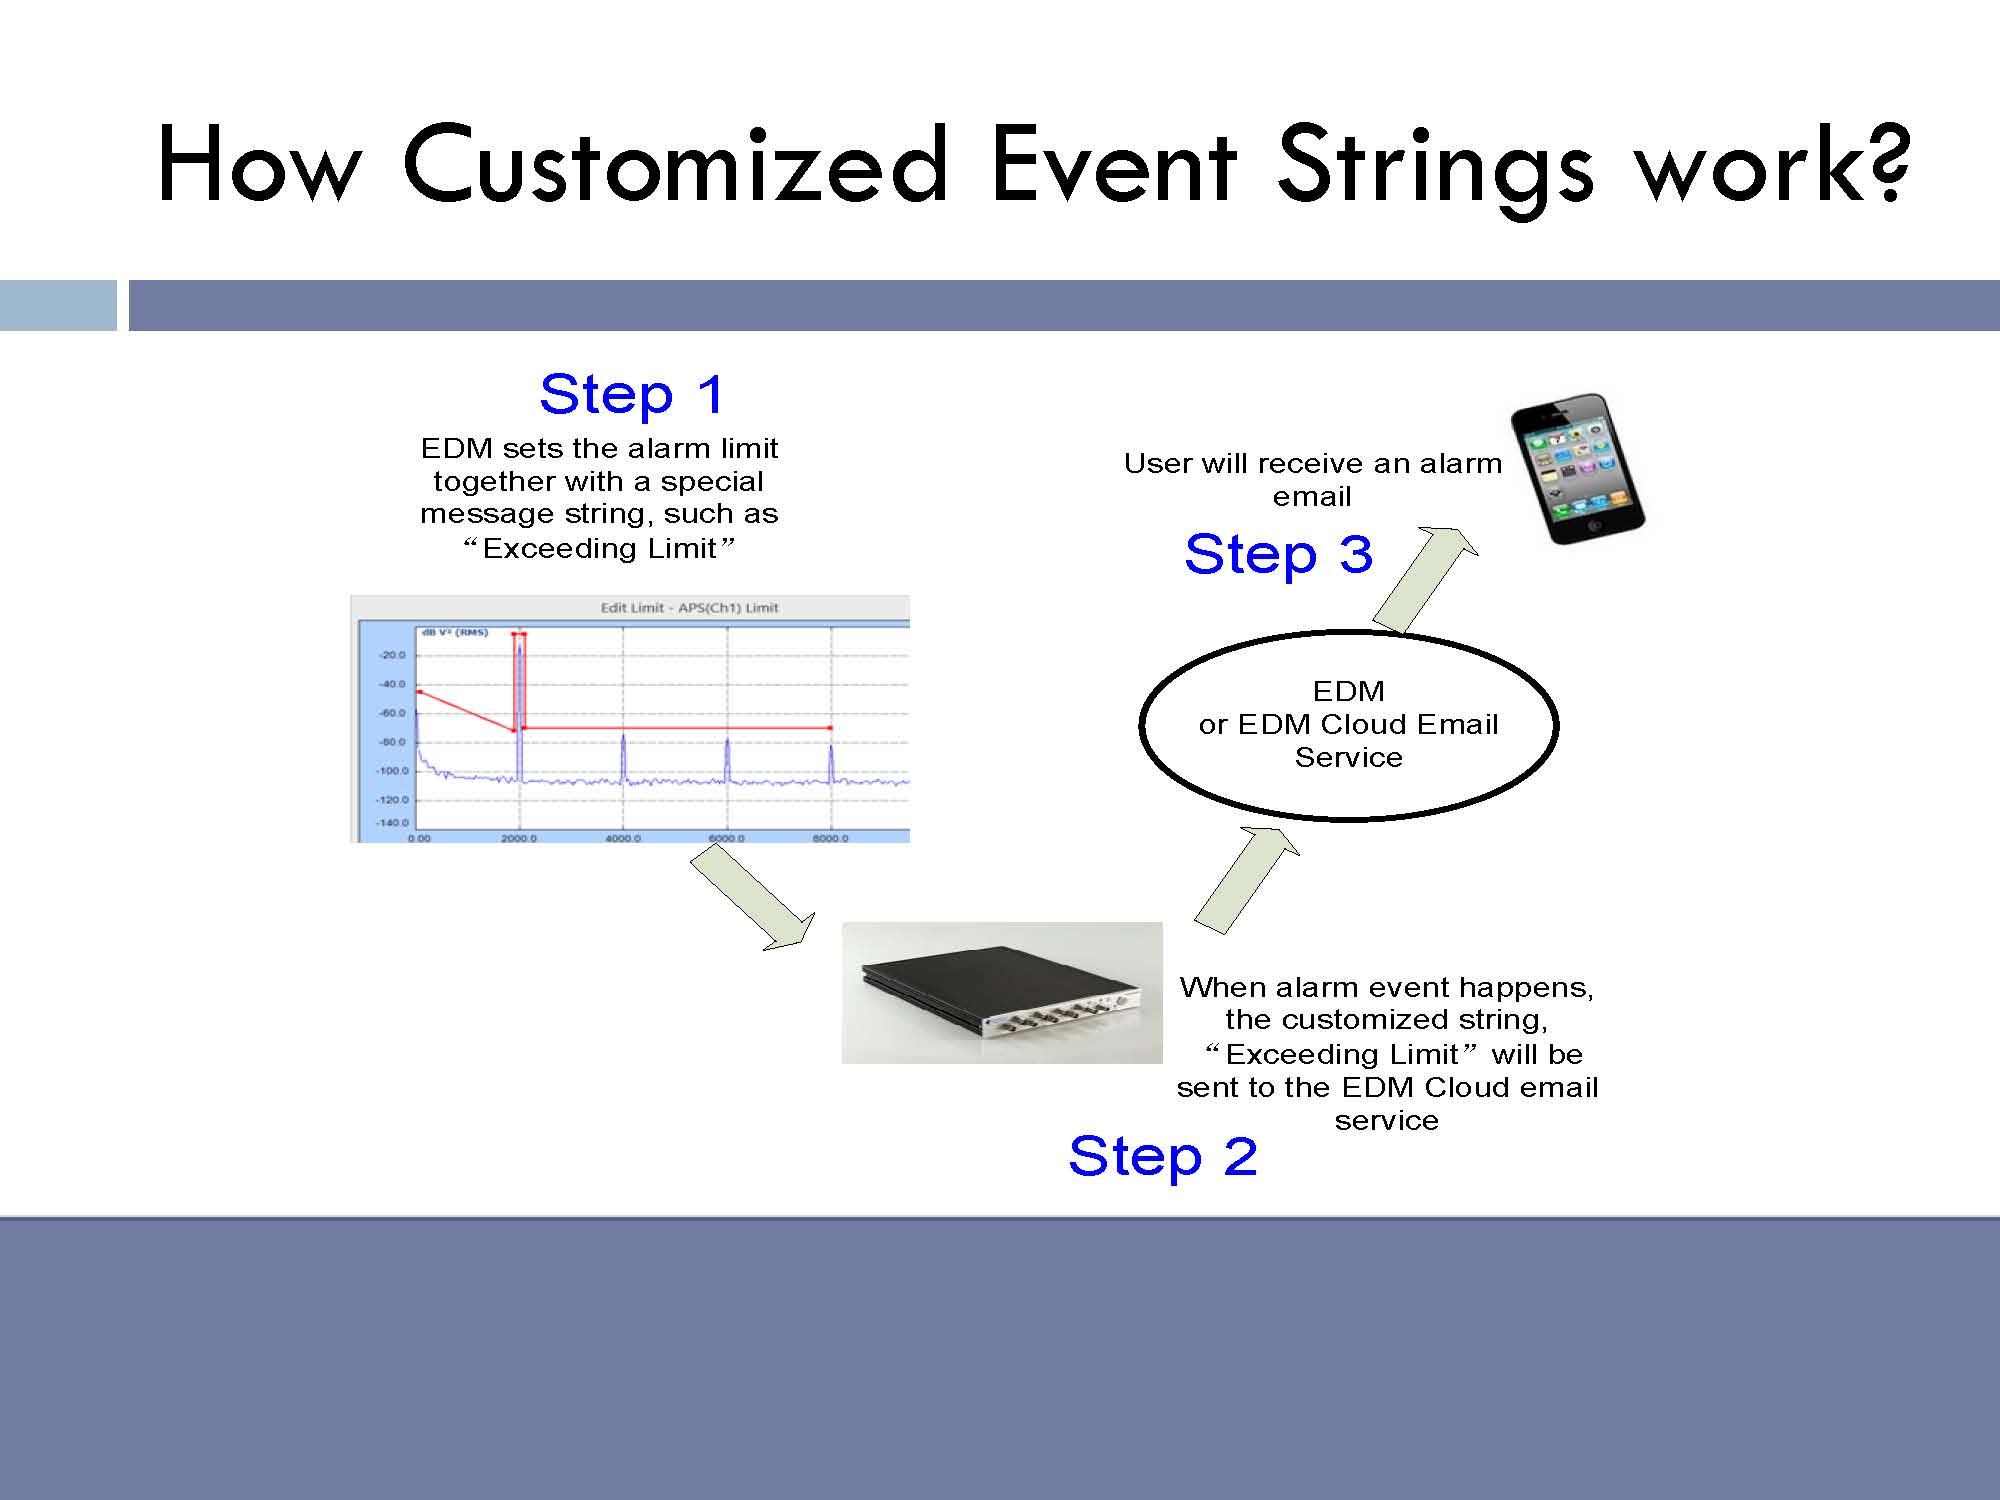   How customized event strings work: EDM sets the alarm limit together with a special message string, such as “exceeding limit”. When alarm event happens, the customized string, “exceeding limit” will be sent to the EDM Cloud email service. User will